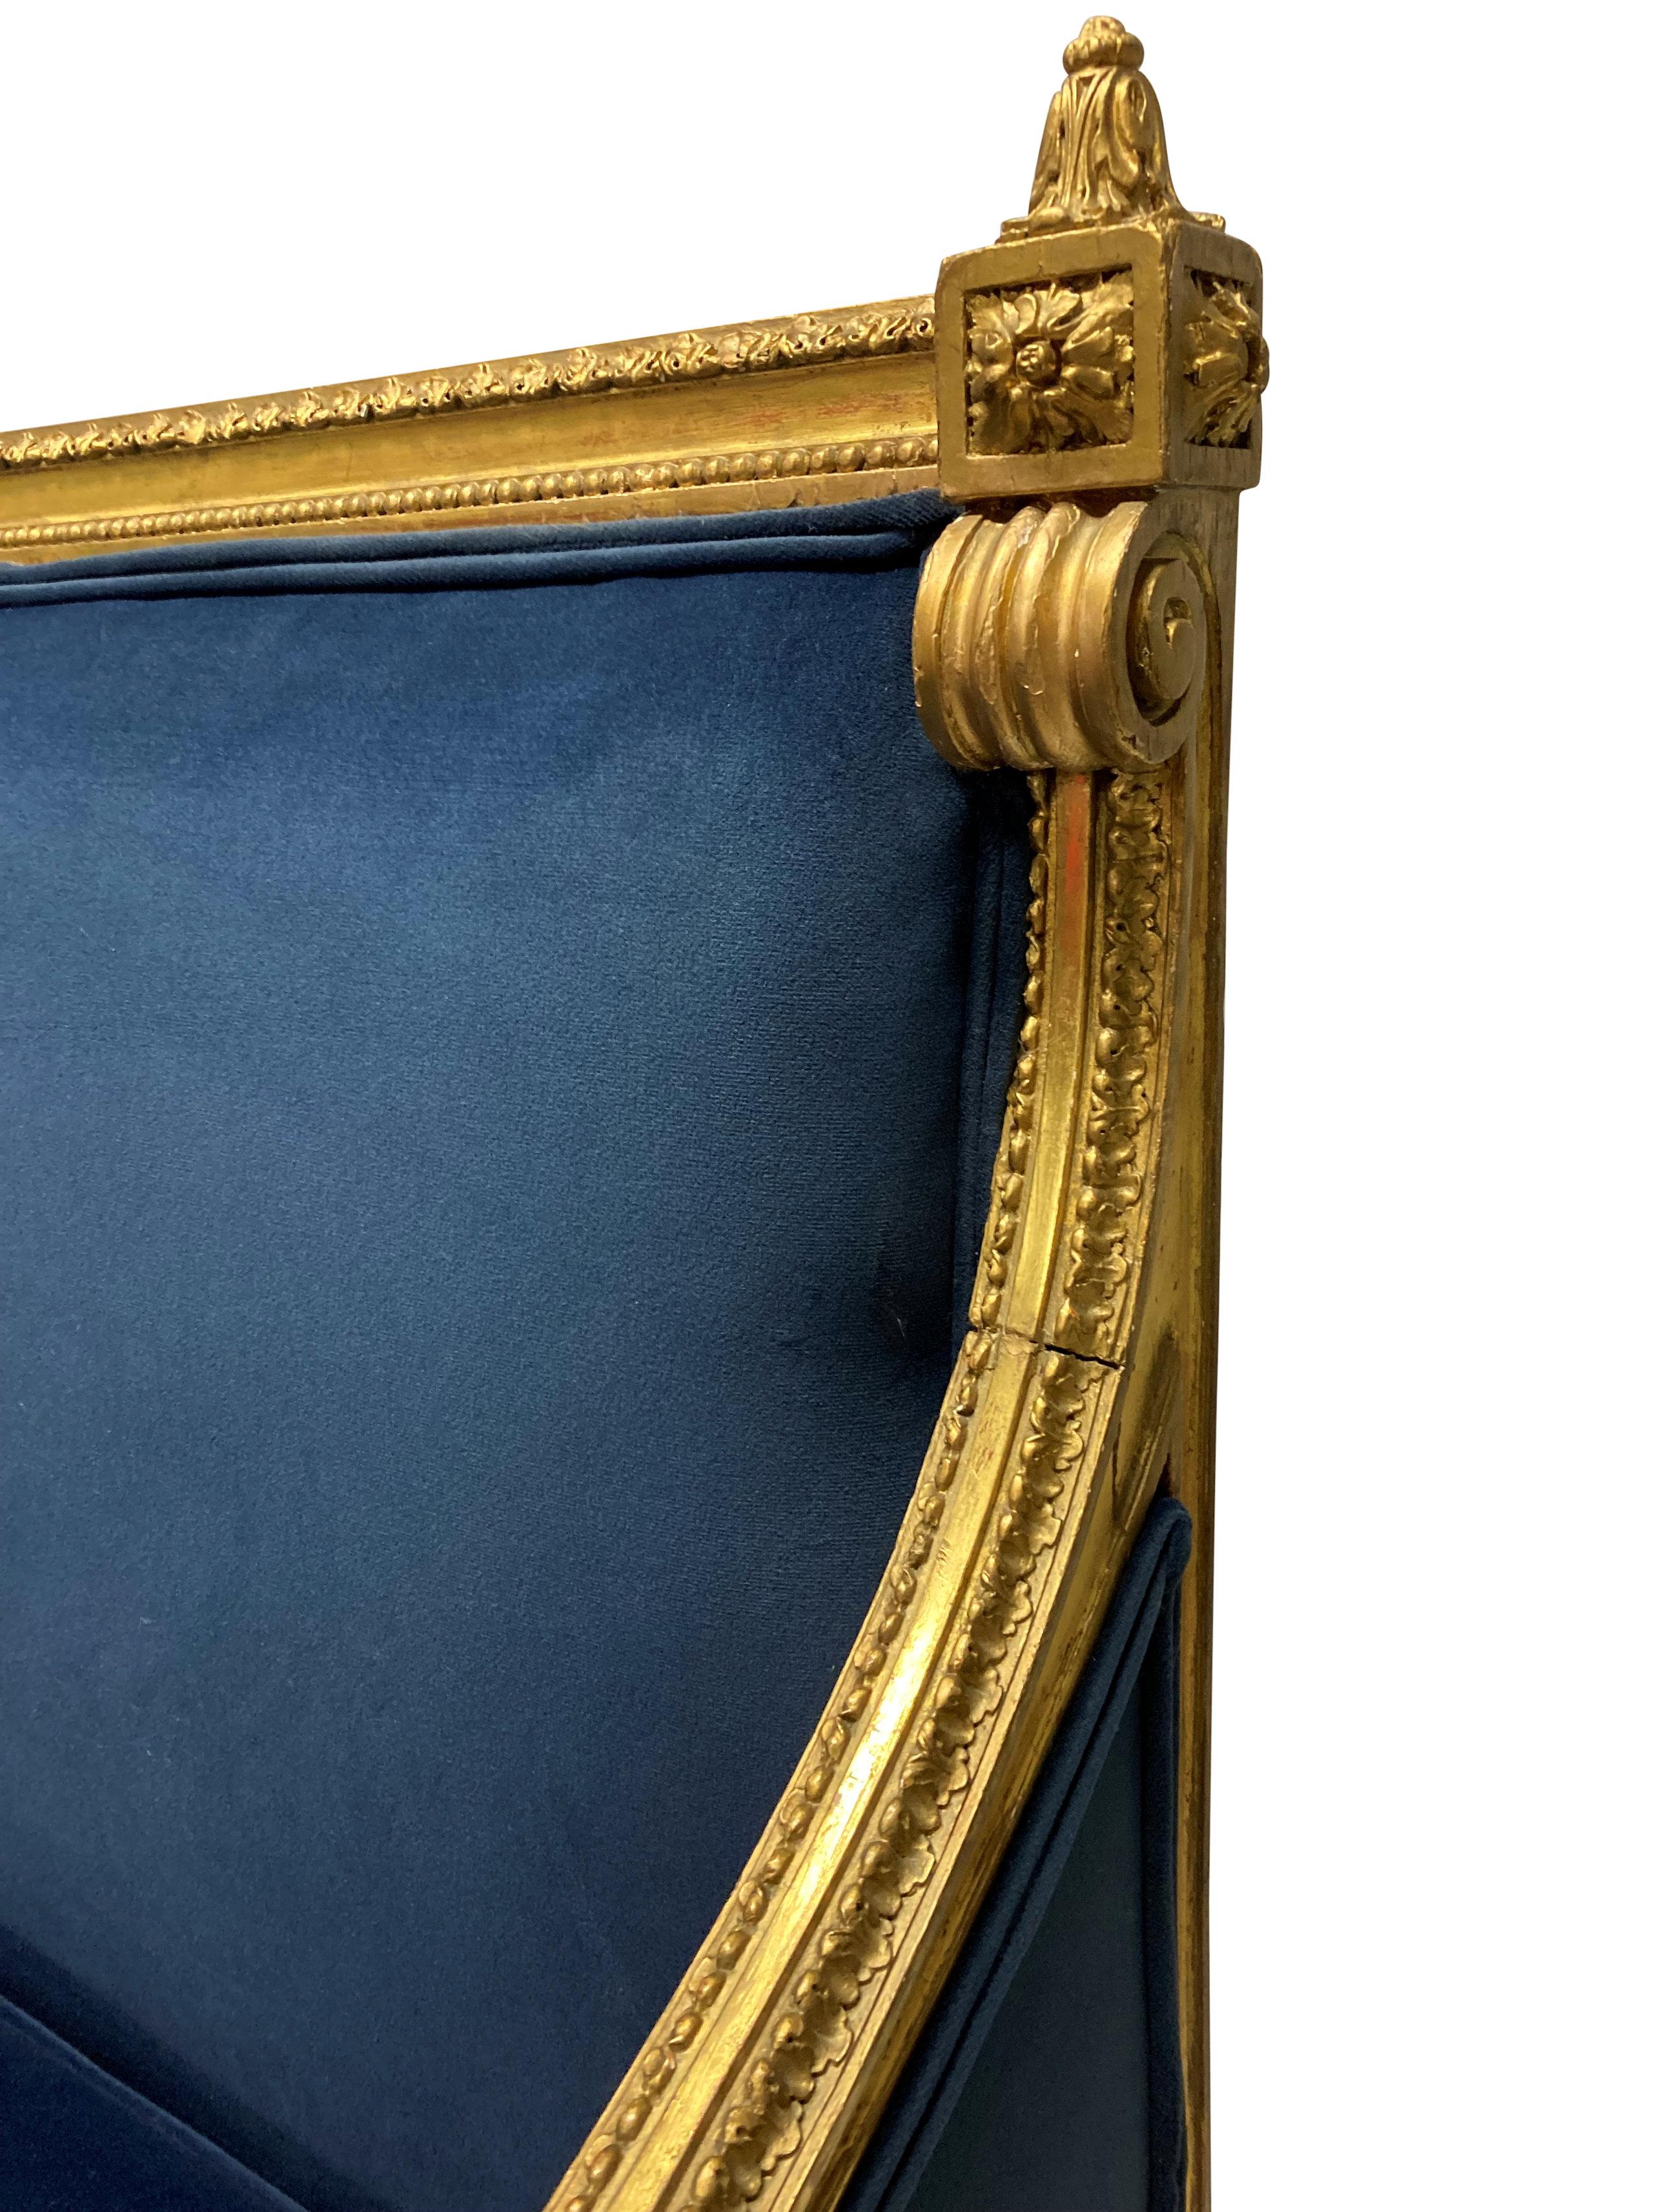 French Louis XVI Style Giltwood Settee In Blue Velvet For Sale 4